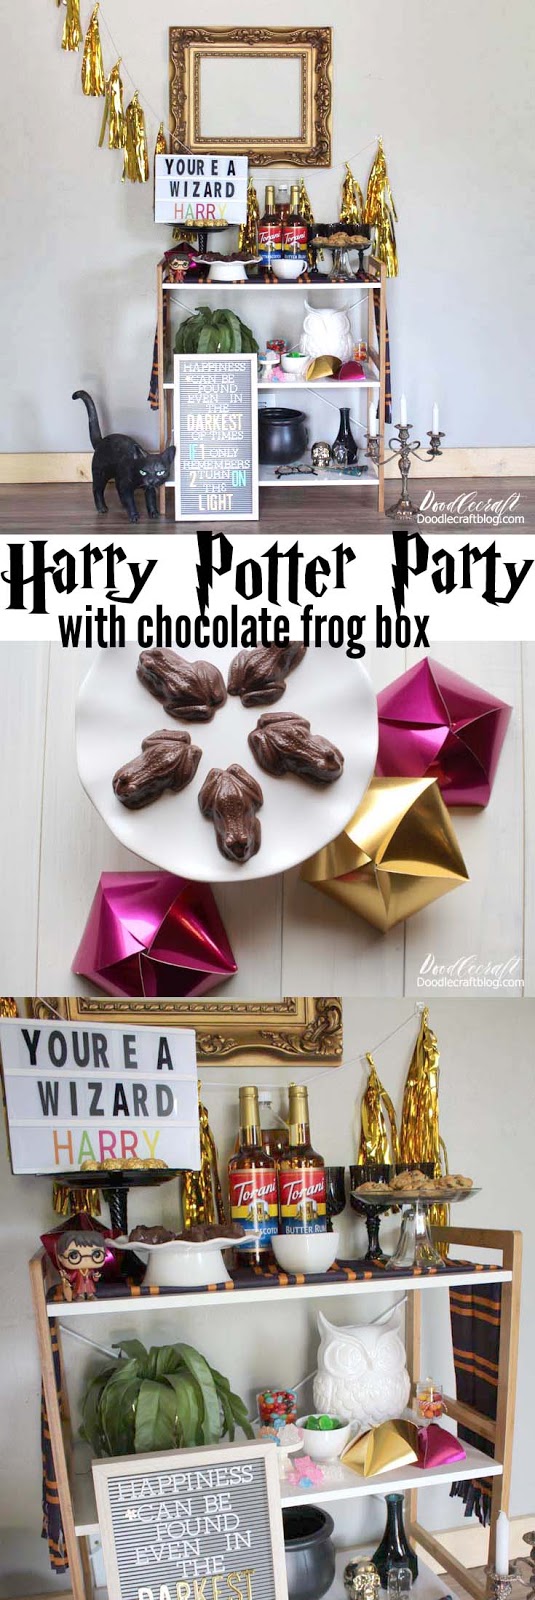 Harry Potter Party Chocolate Frog Box Pattern